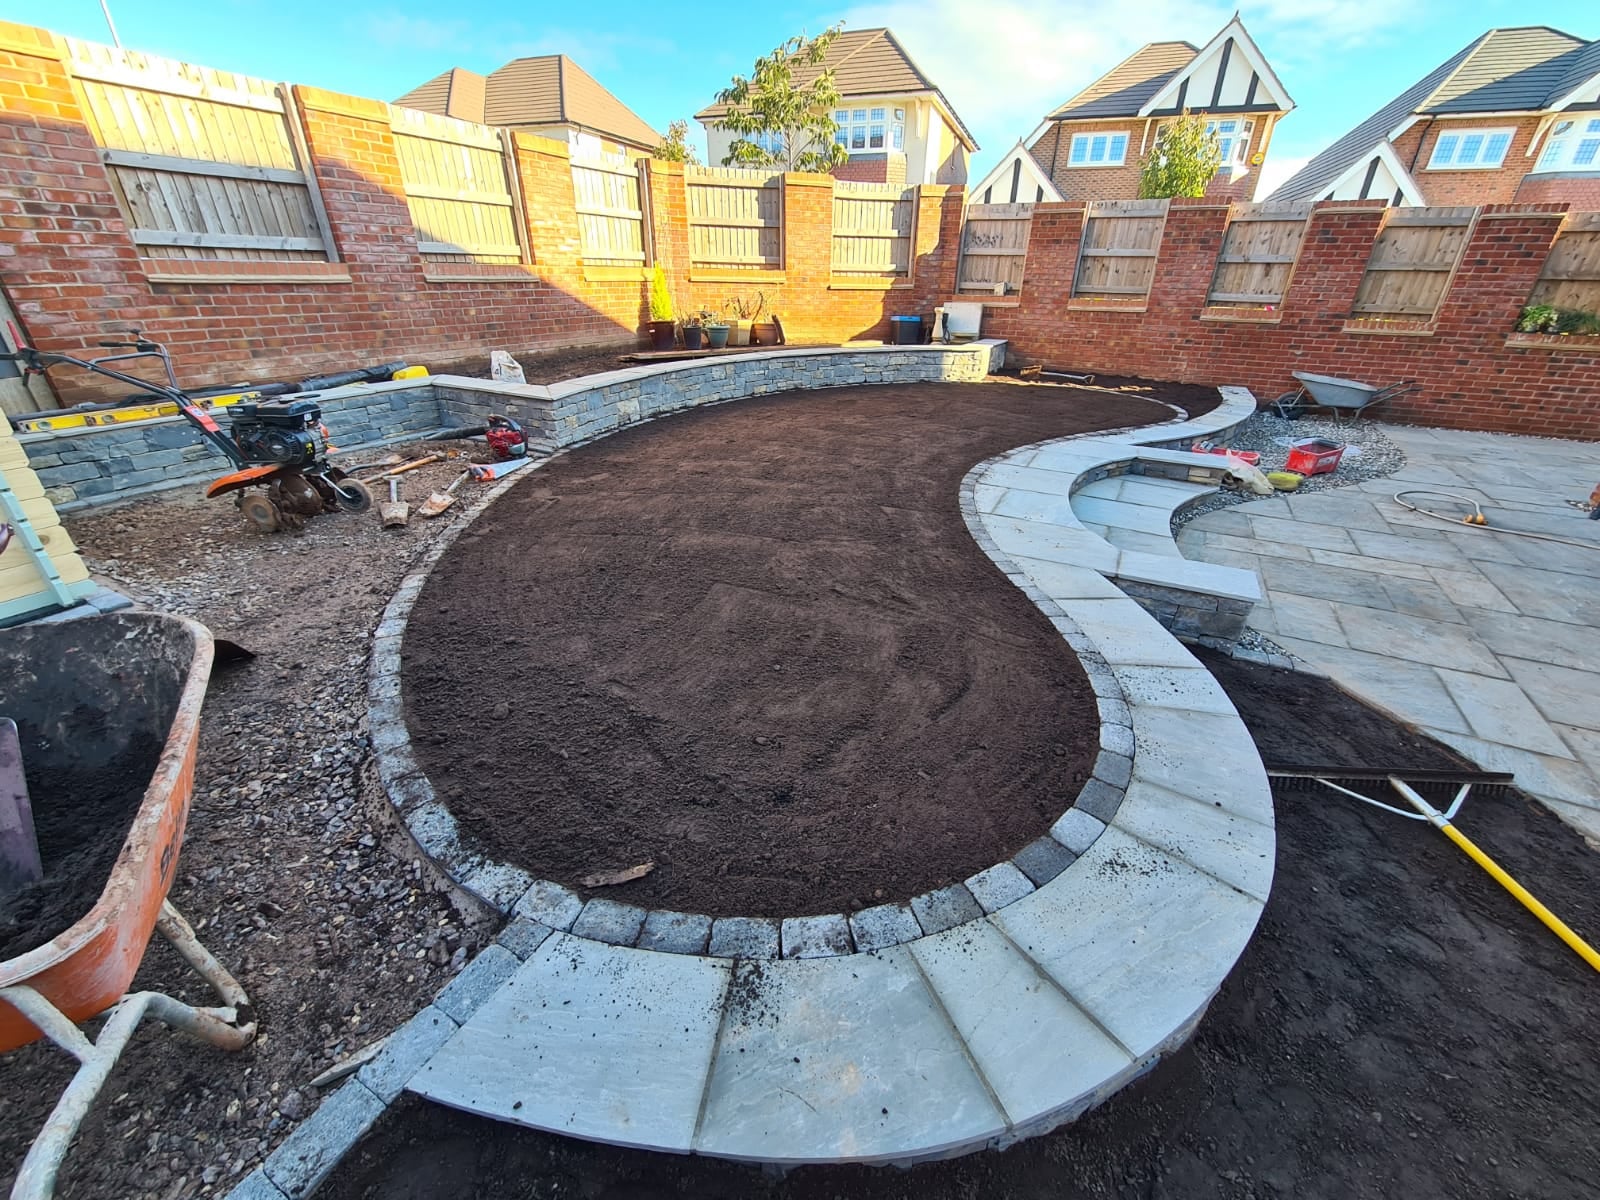 Boomerang Lawn Case Study - During - Soil laid within stone foundations